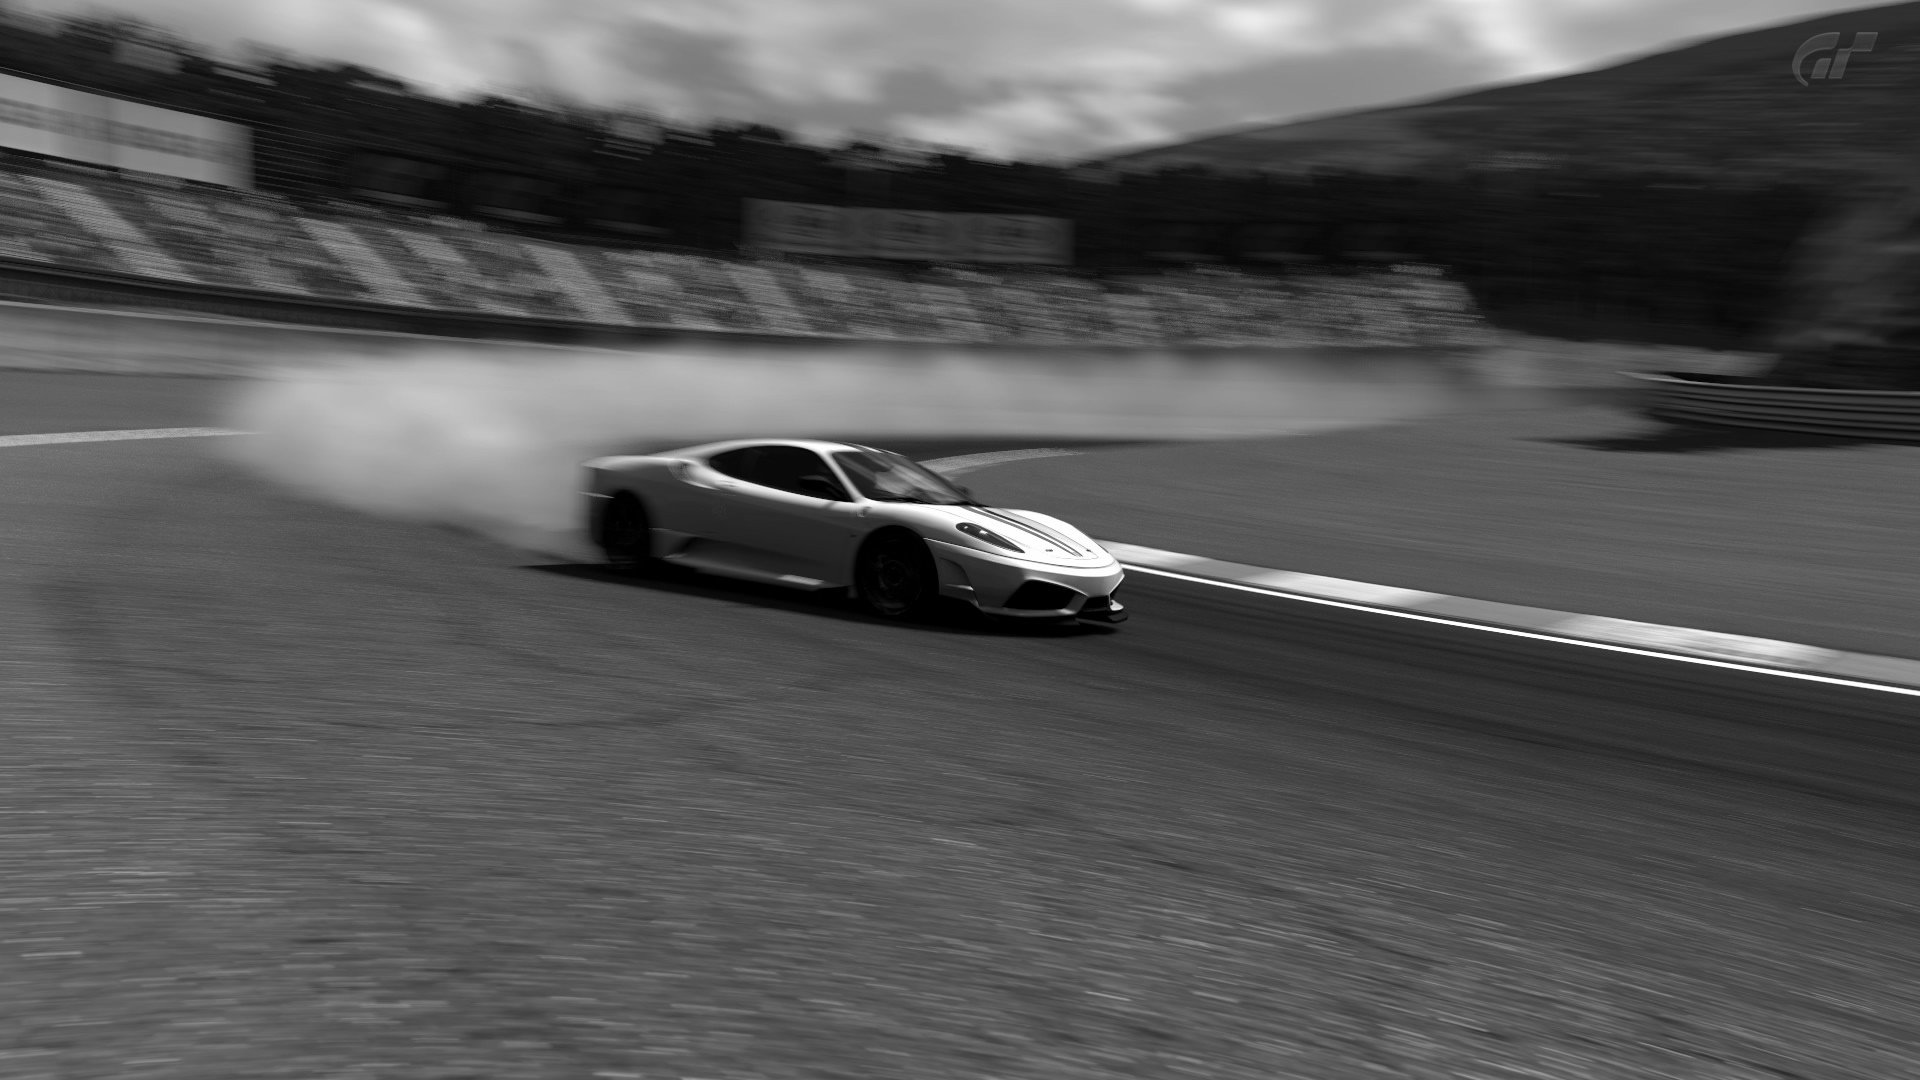 Awesome Gran Turismo 5 free wallpaper ID:73668 for hd 1920x1080 computer